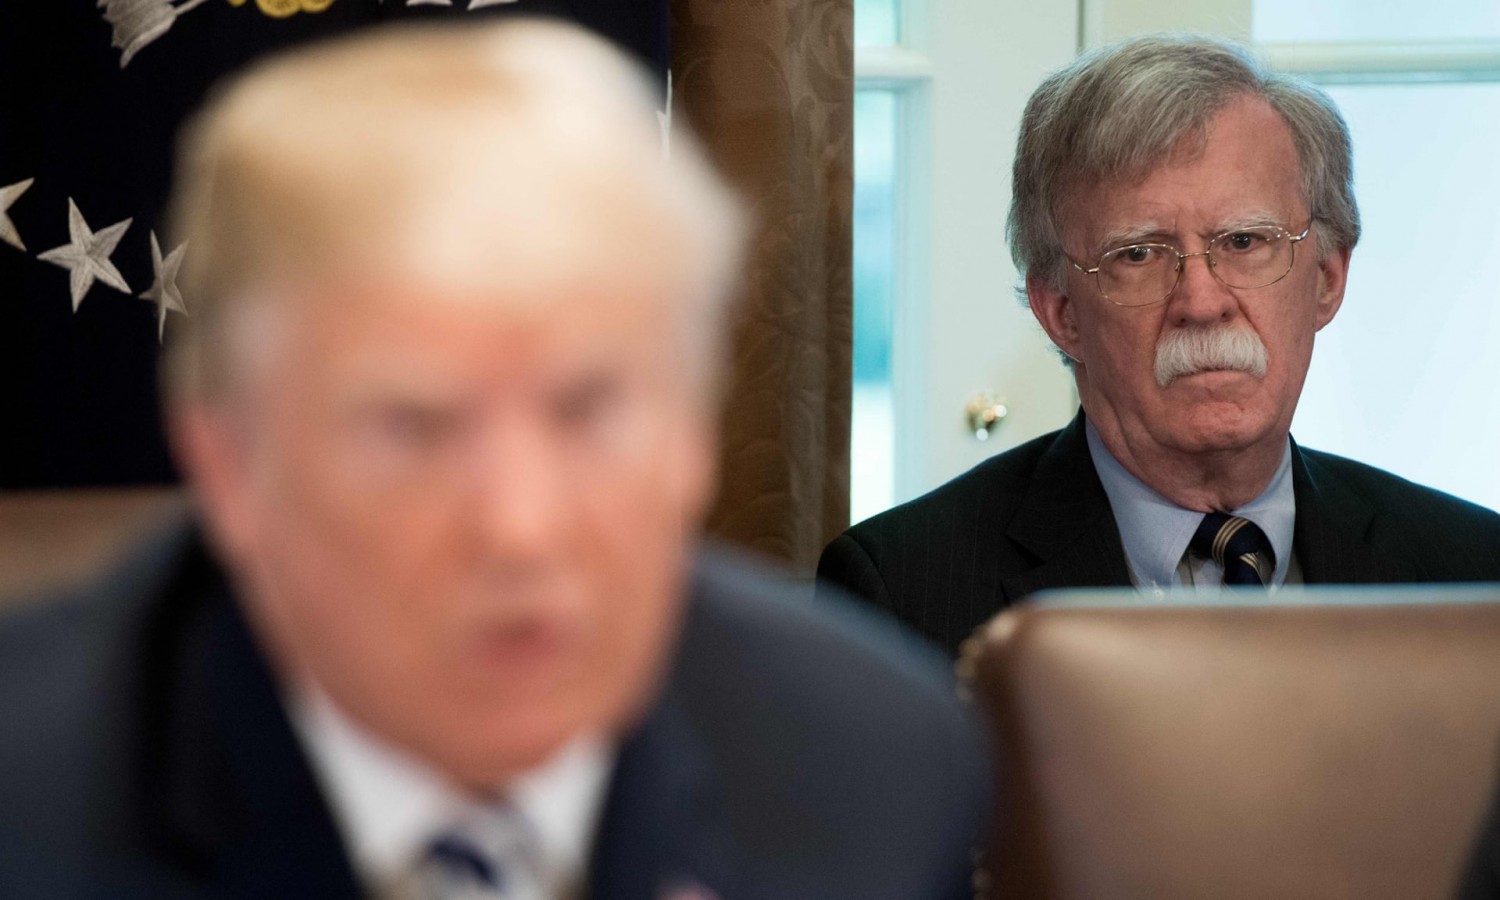  Bolton ‘played Trump like a Stradivarius’, according to one former aide. Photograph: Saul Loeb/AFP/Getty Images